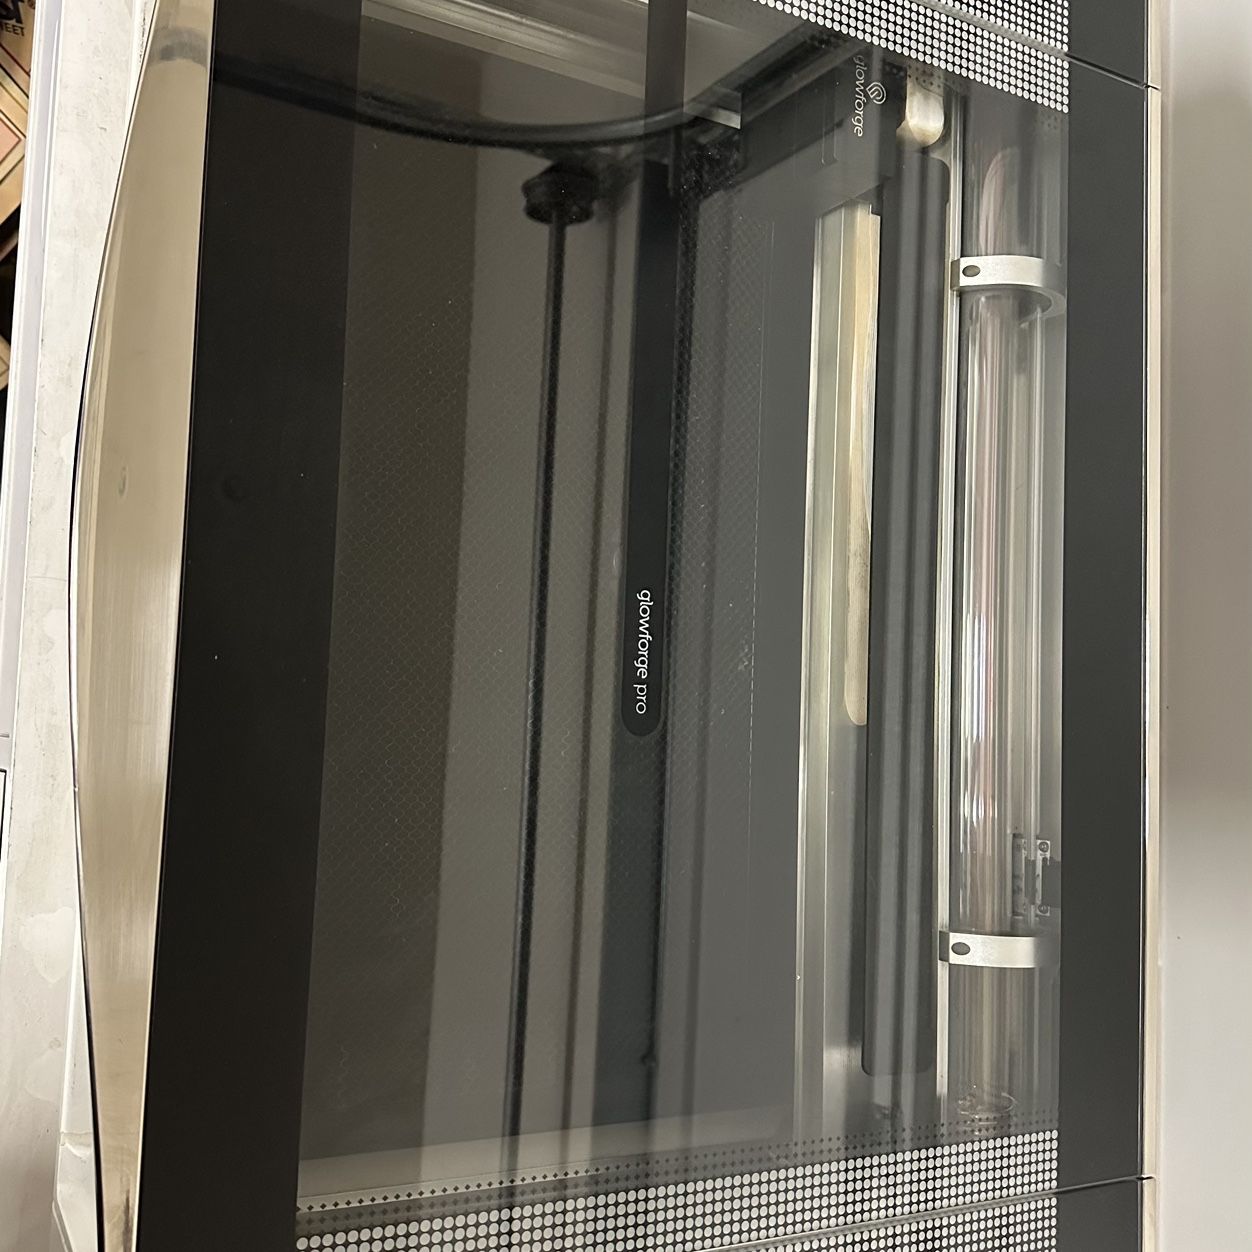 Glowforge Pro with Filter